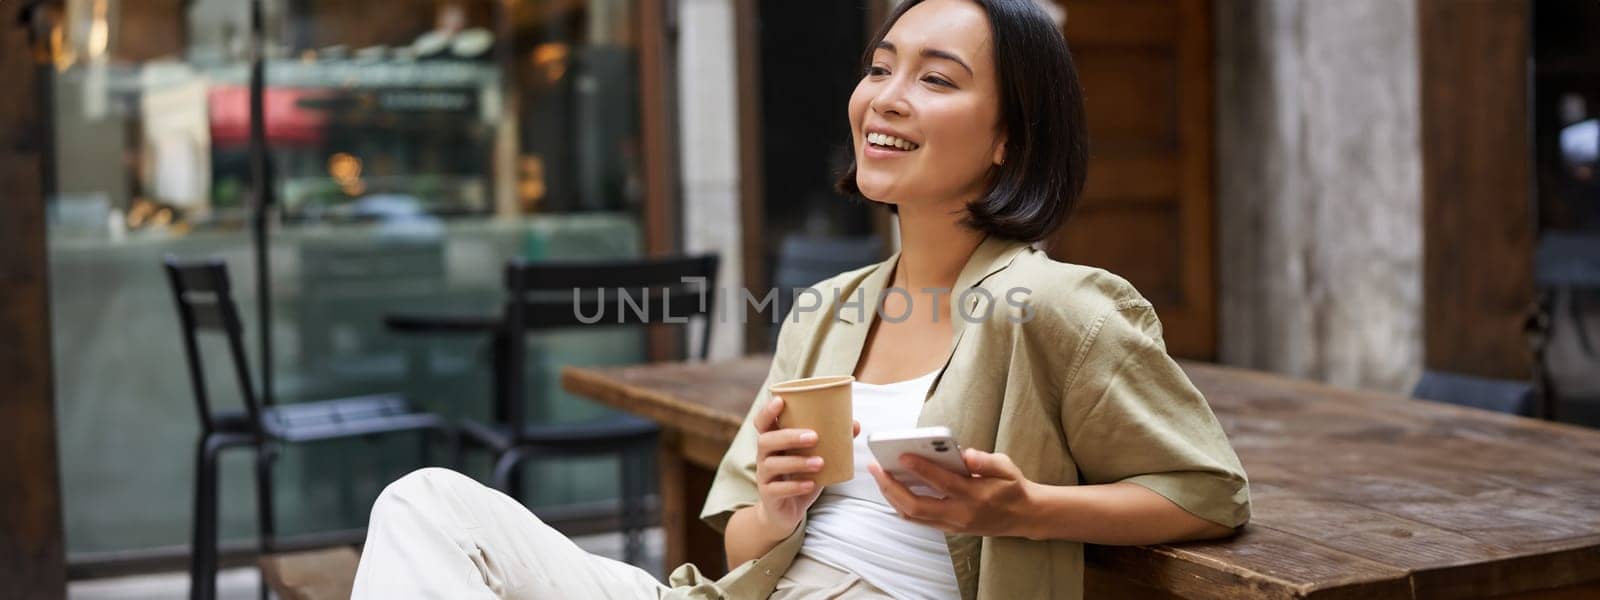 Stylish urban girl sits with her phone in cafe, drinks coffee and chatting, browsing social media on smartphone.